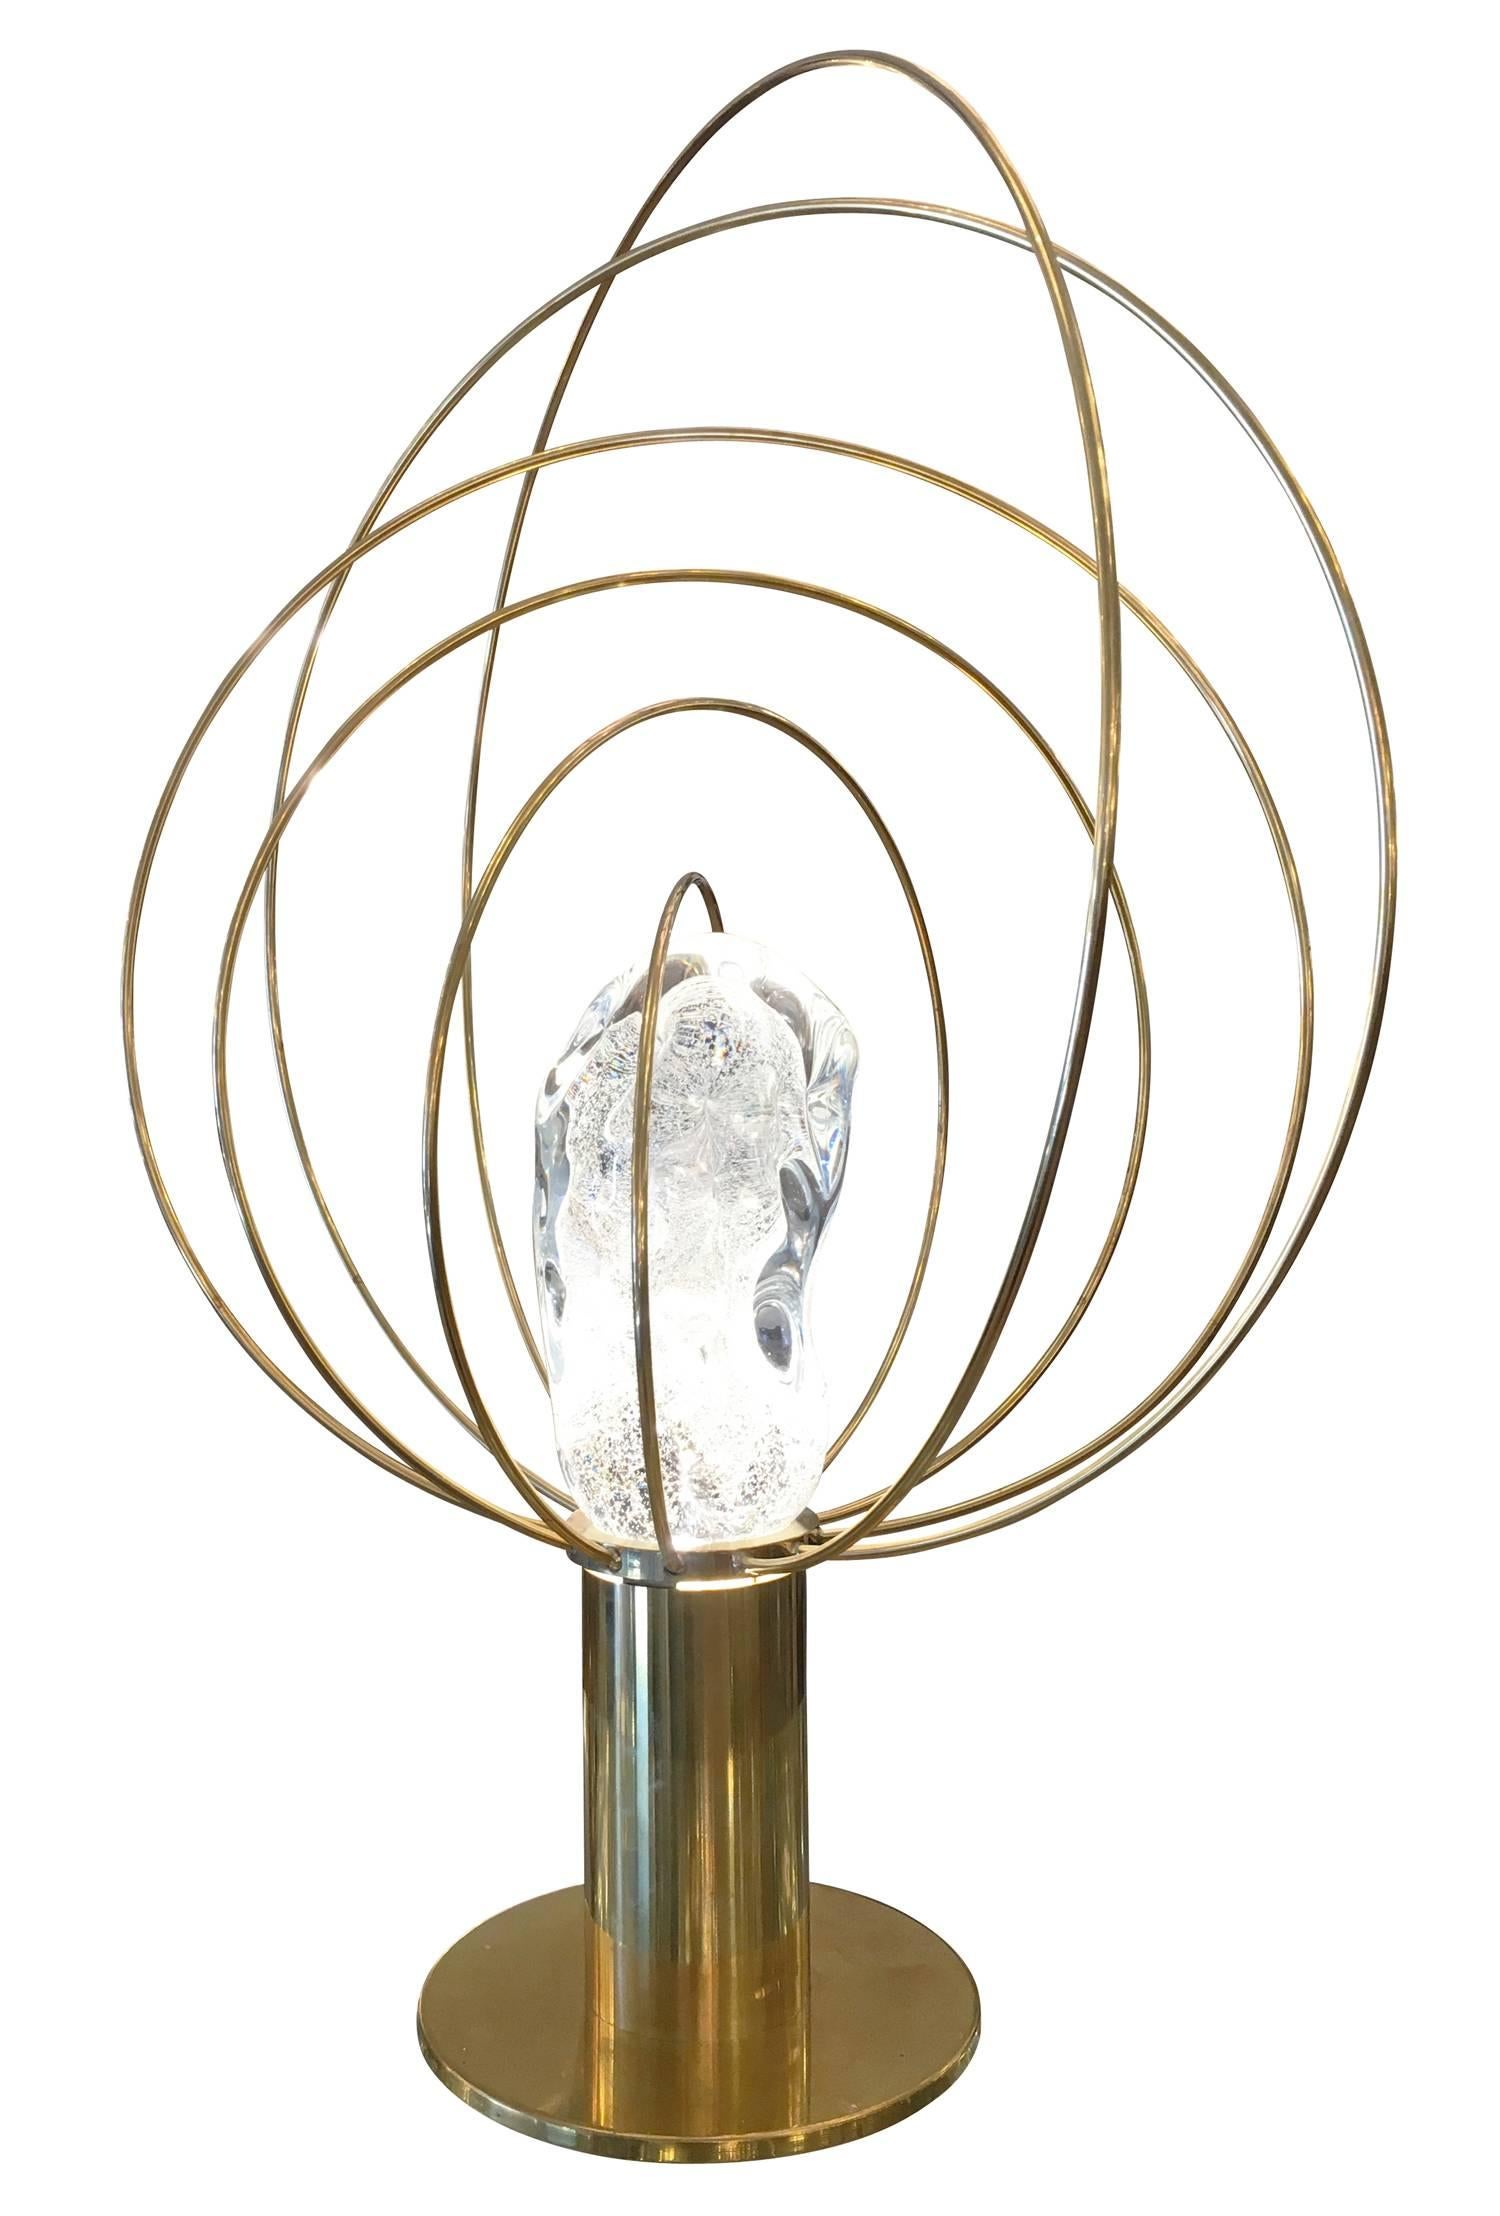 Stunning brass table lamp designed by Angelo Brotto in the 1960s for Italian lighting company Esperia. Exclusively available at Gaspare Asaro-Italian modern, Esperia manufactures them in limited quantities. It features a handmade glass amber incased